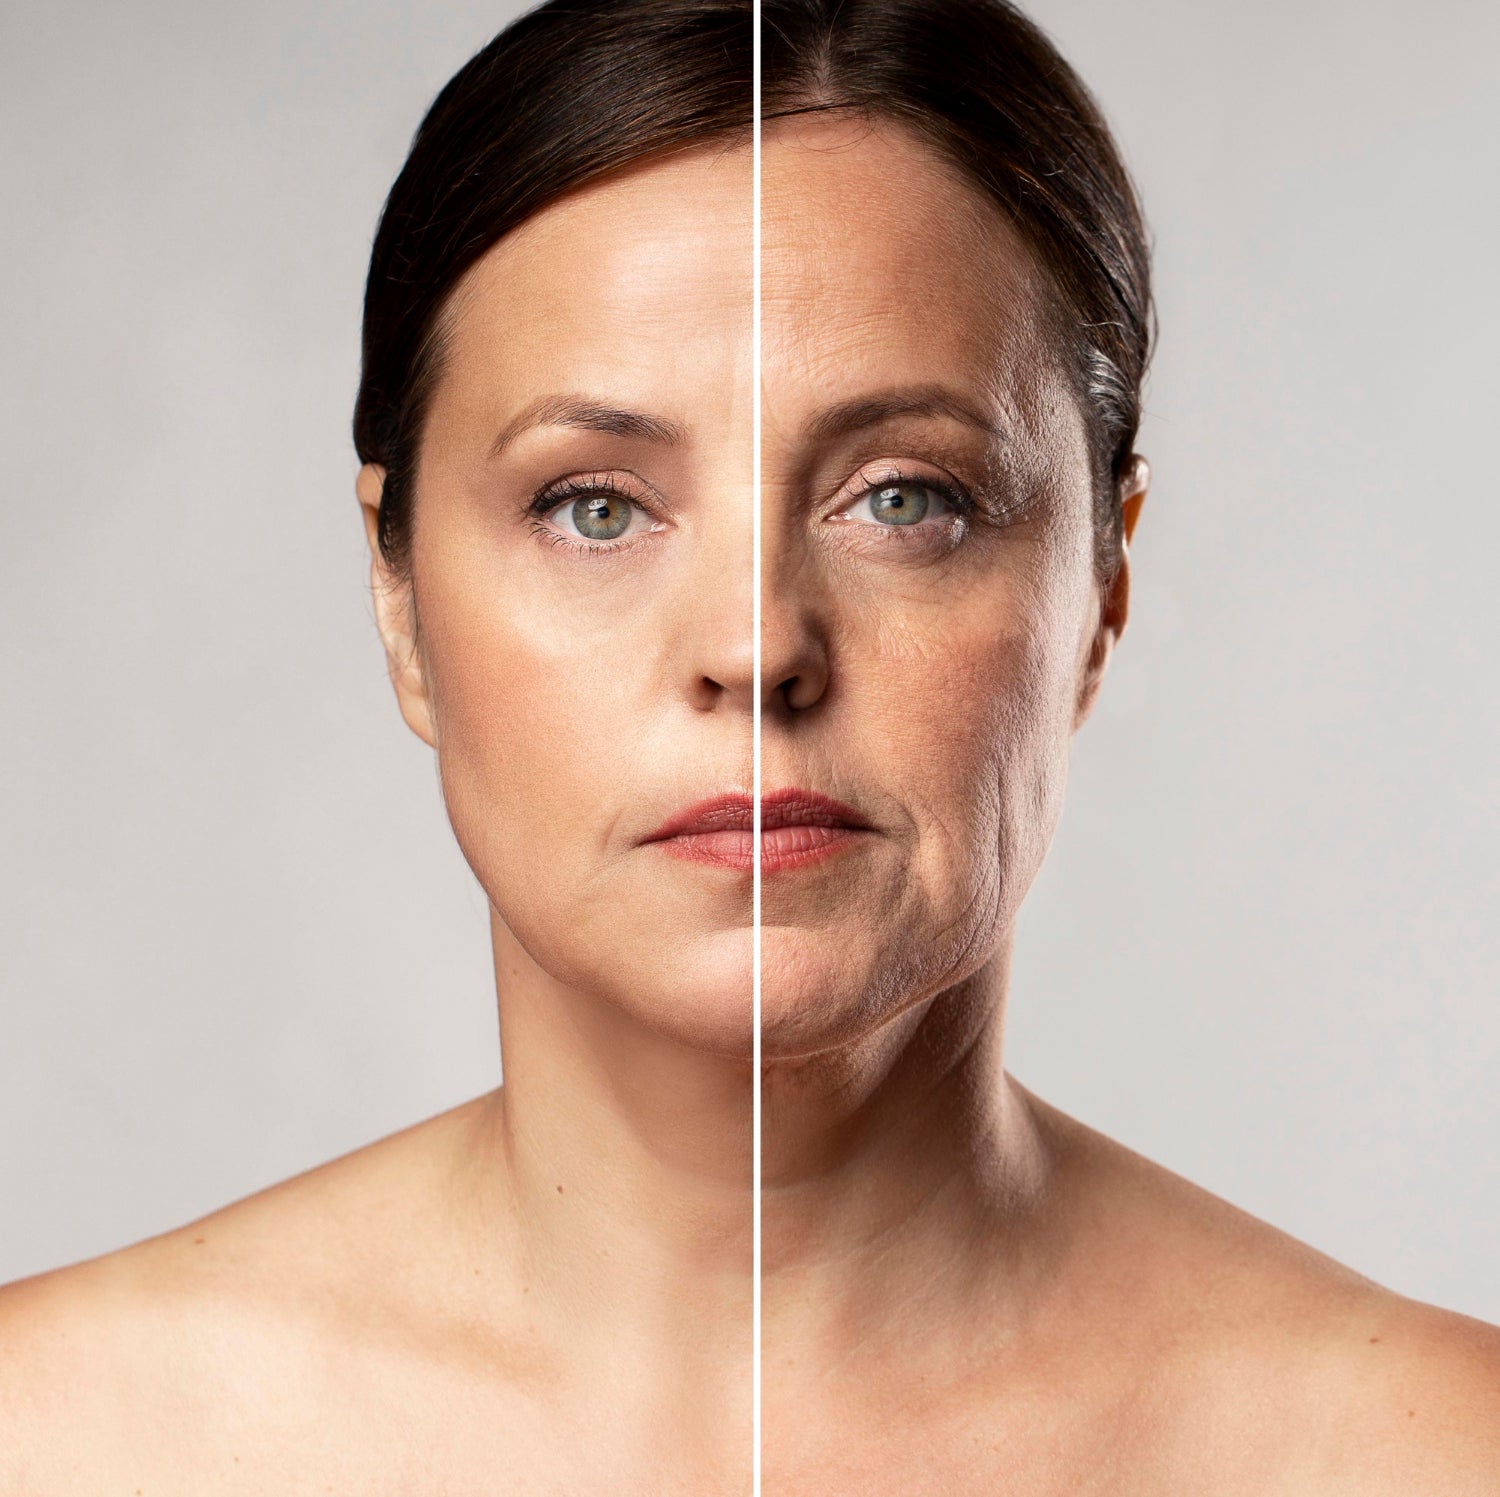 Image by <a href="https://www.freepik.com/free-photo/before-after-portrait-mature-woman-retouched_18962235.htm#query=skincare%20anti%20aging&position=45&from_view=search&track=ais">Freepik</a>